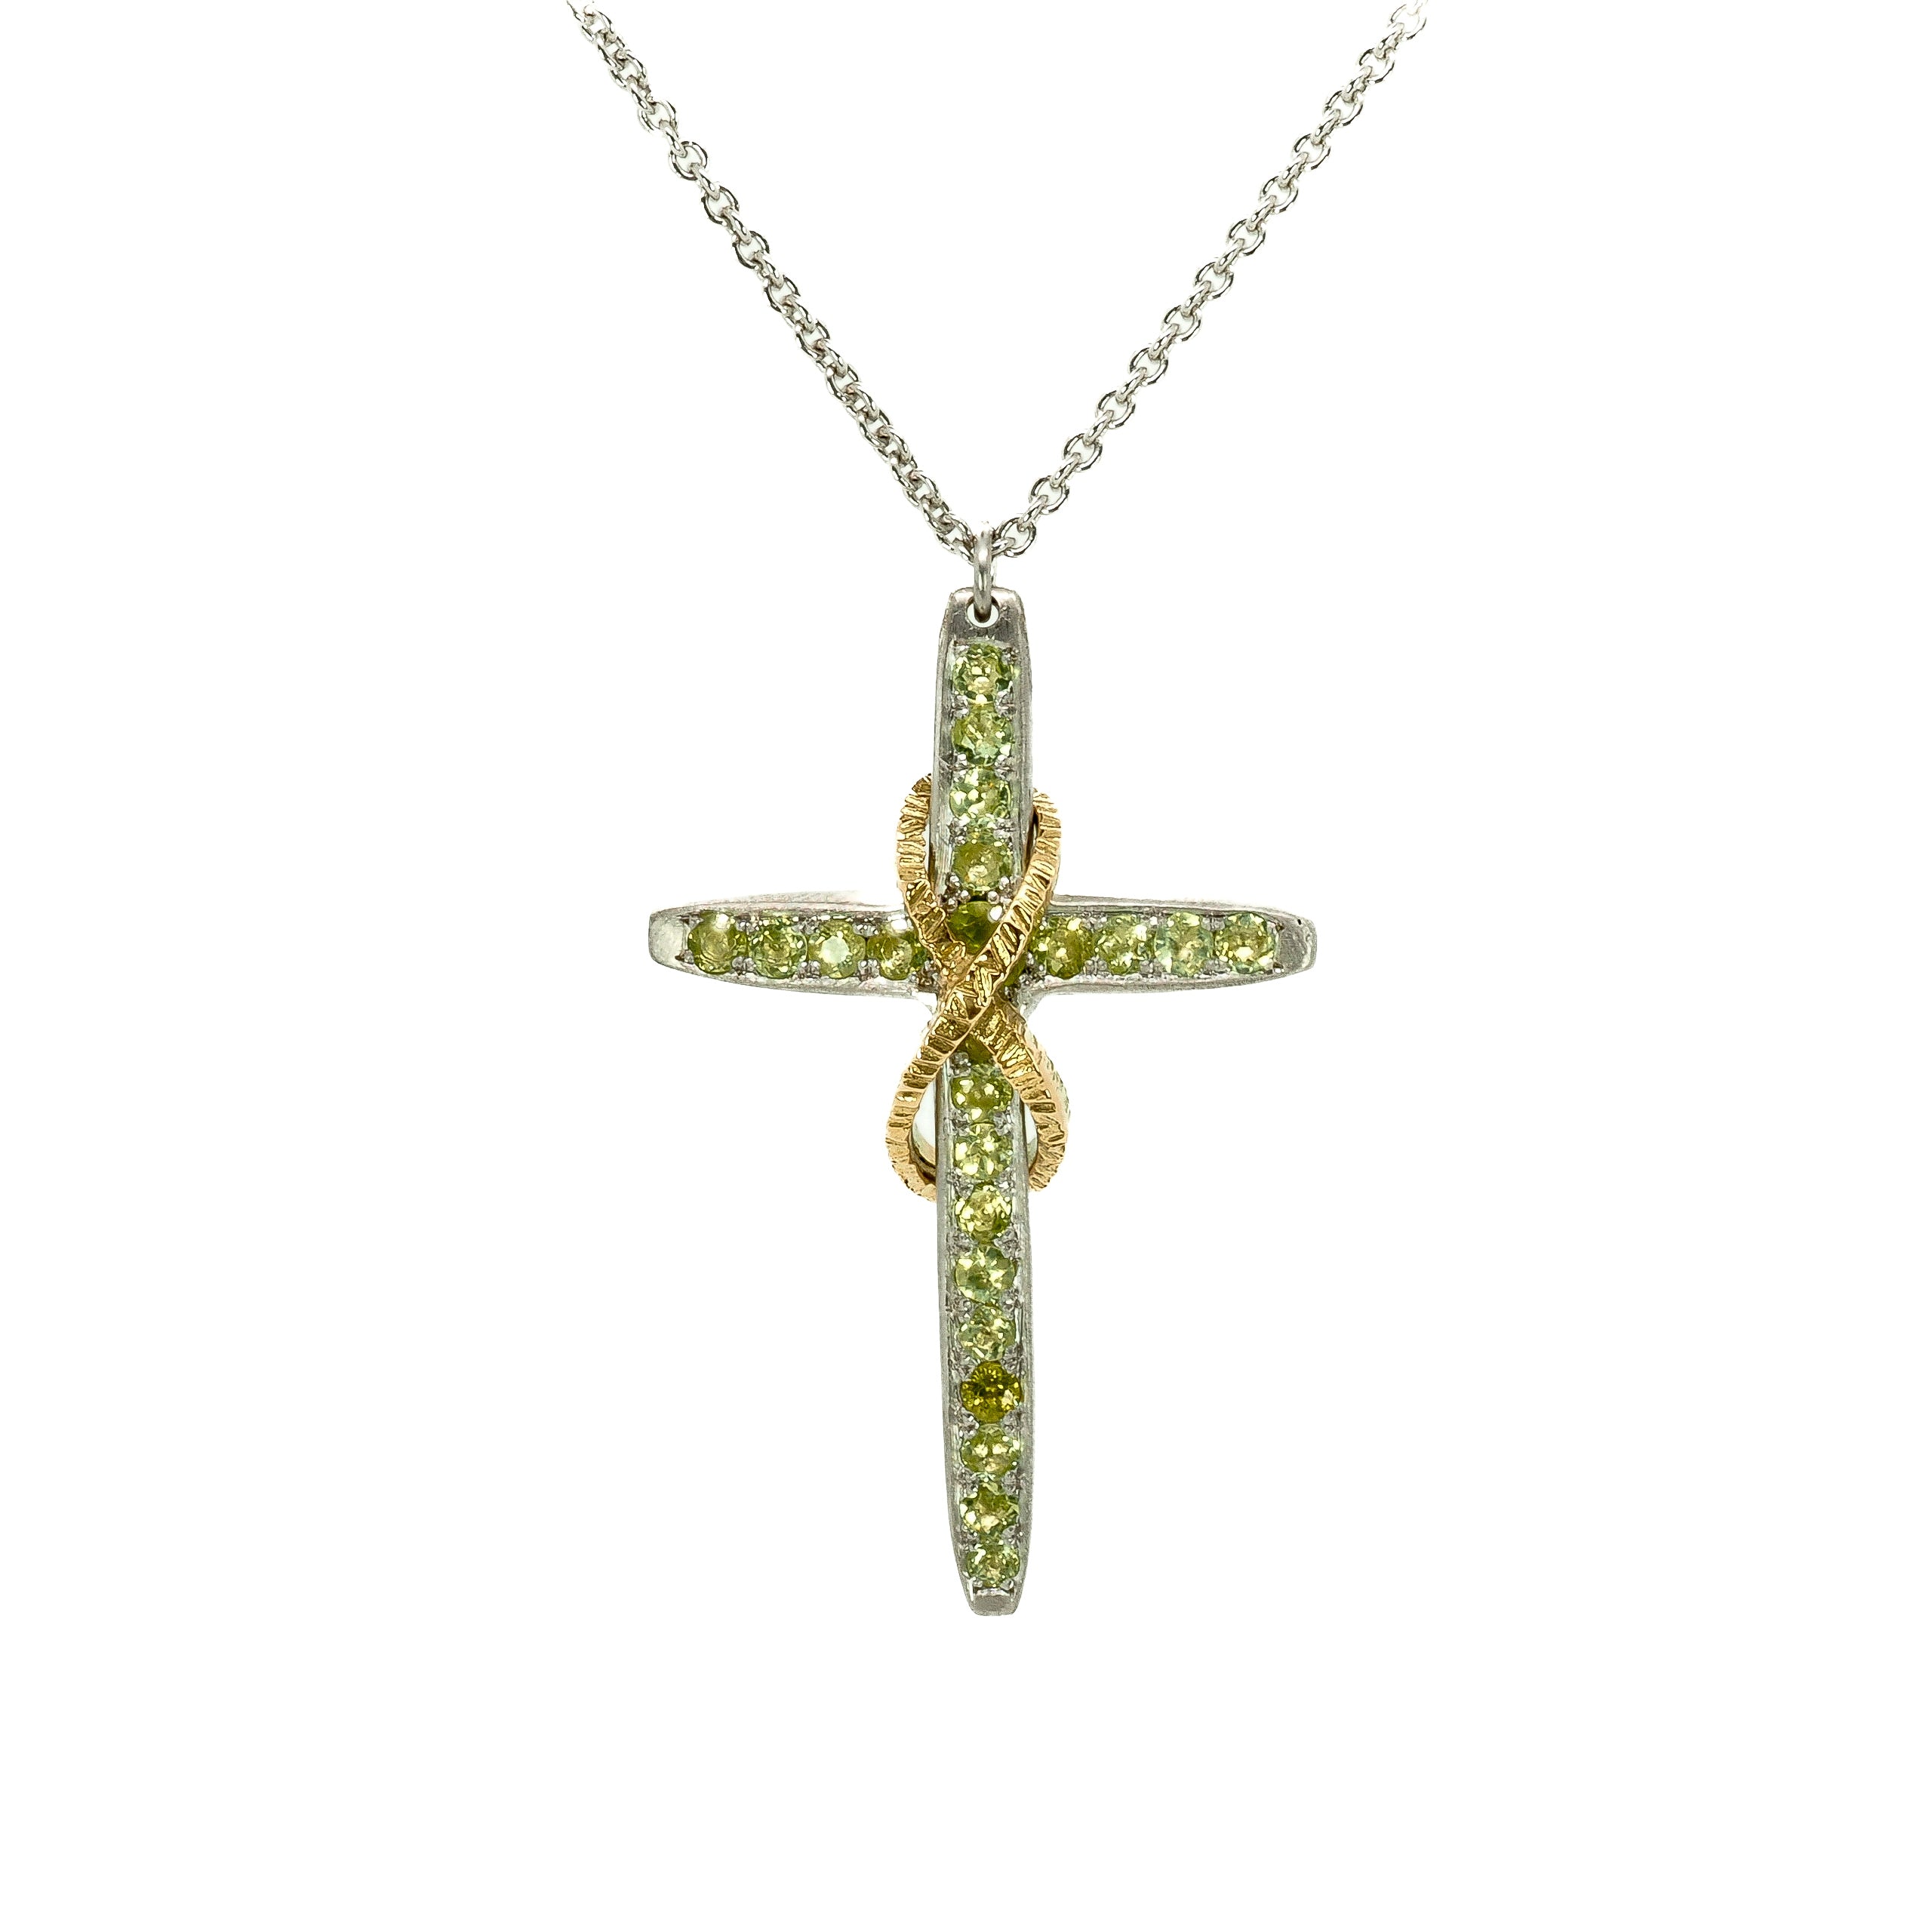 Taru Jewelry Cross and Infinity Necklace crafted from 18K yellow gold and silver is a beautiful combination of traditional symbolism and modern design. The cross, a timeless symbol of faith and devotion, is adorned with sparkling green peridot, adding a touch of color and elegance to the piece.